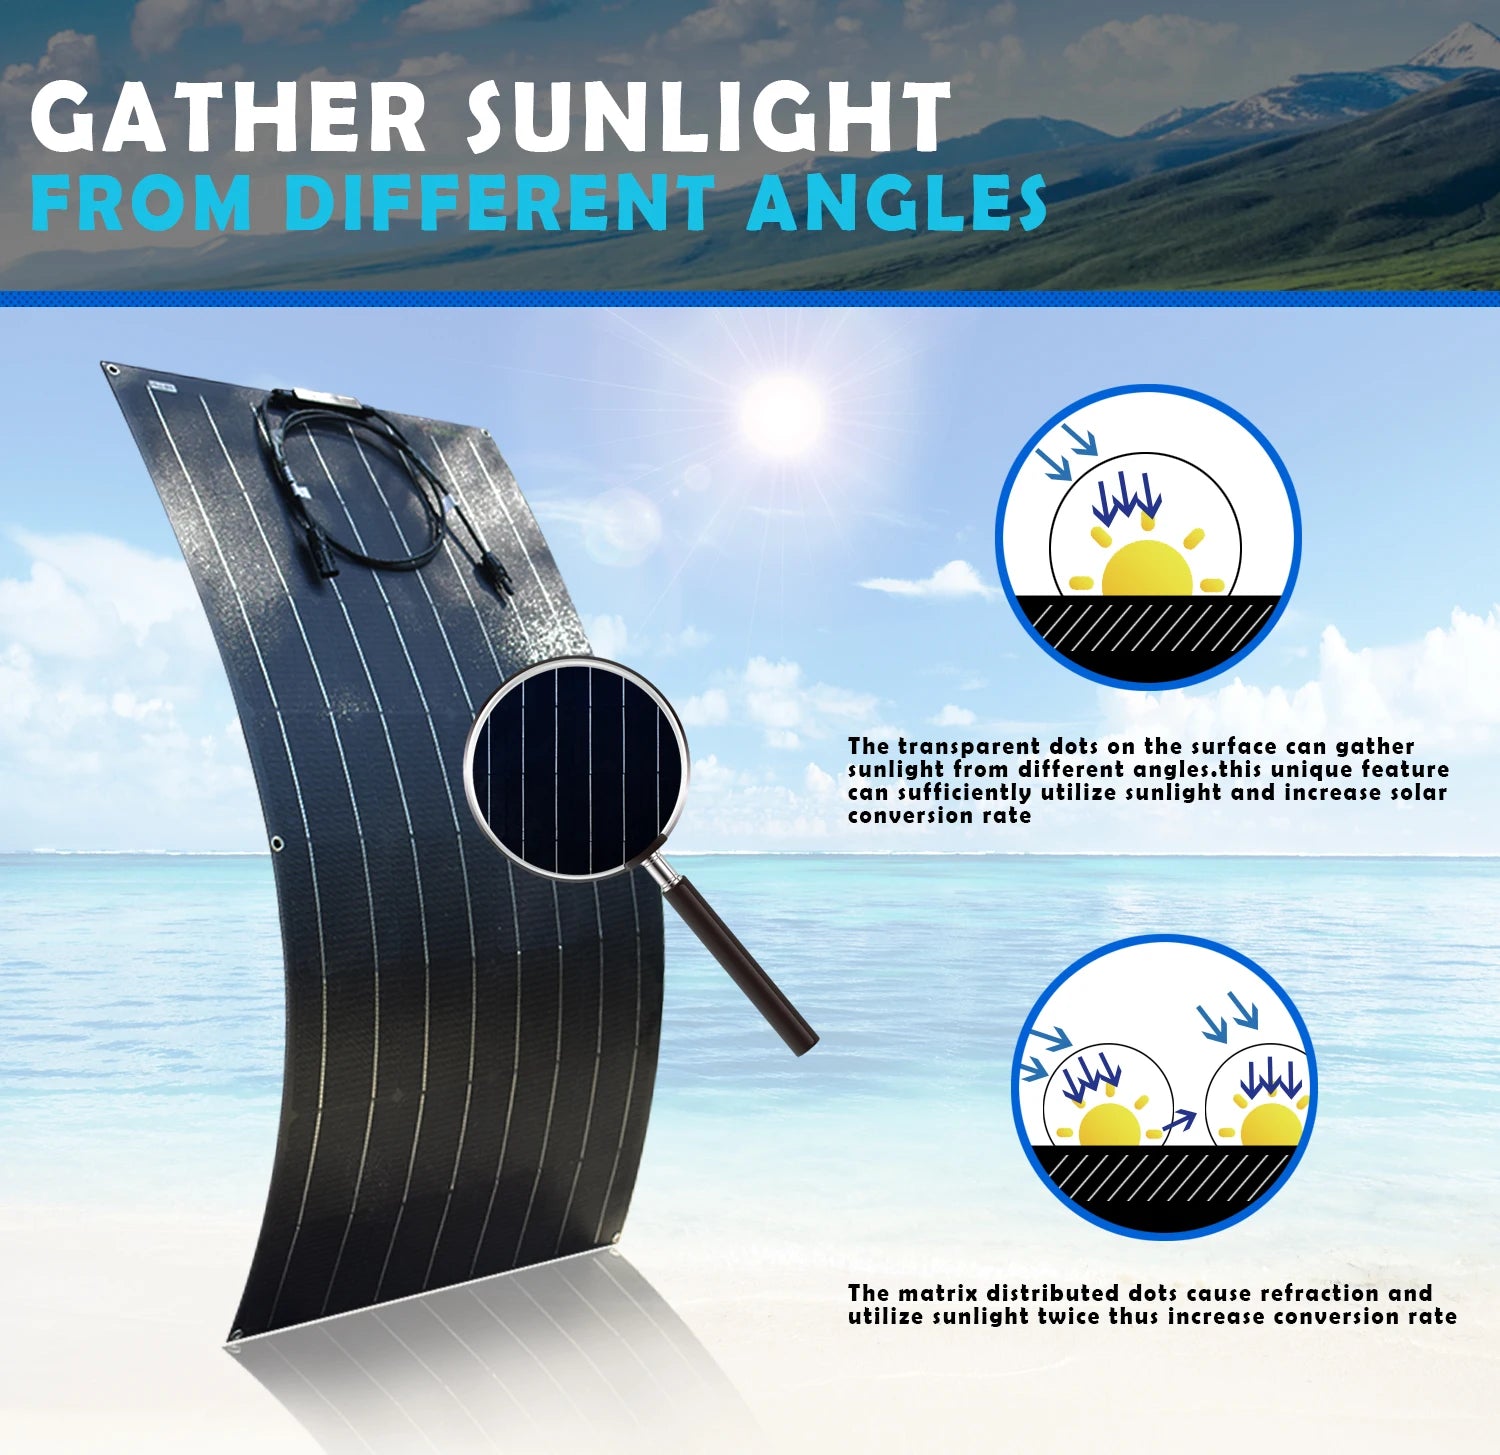 Jingyang Solar Panel, Transparent dots maximize energy conversion by refracting light twice, boosting efficiency.